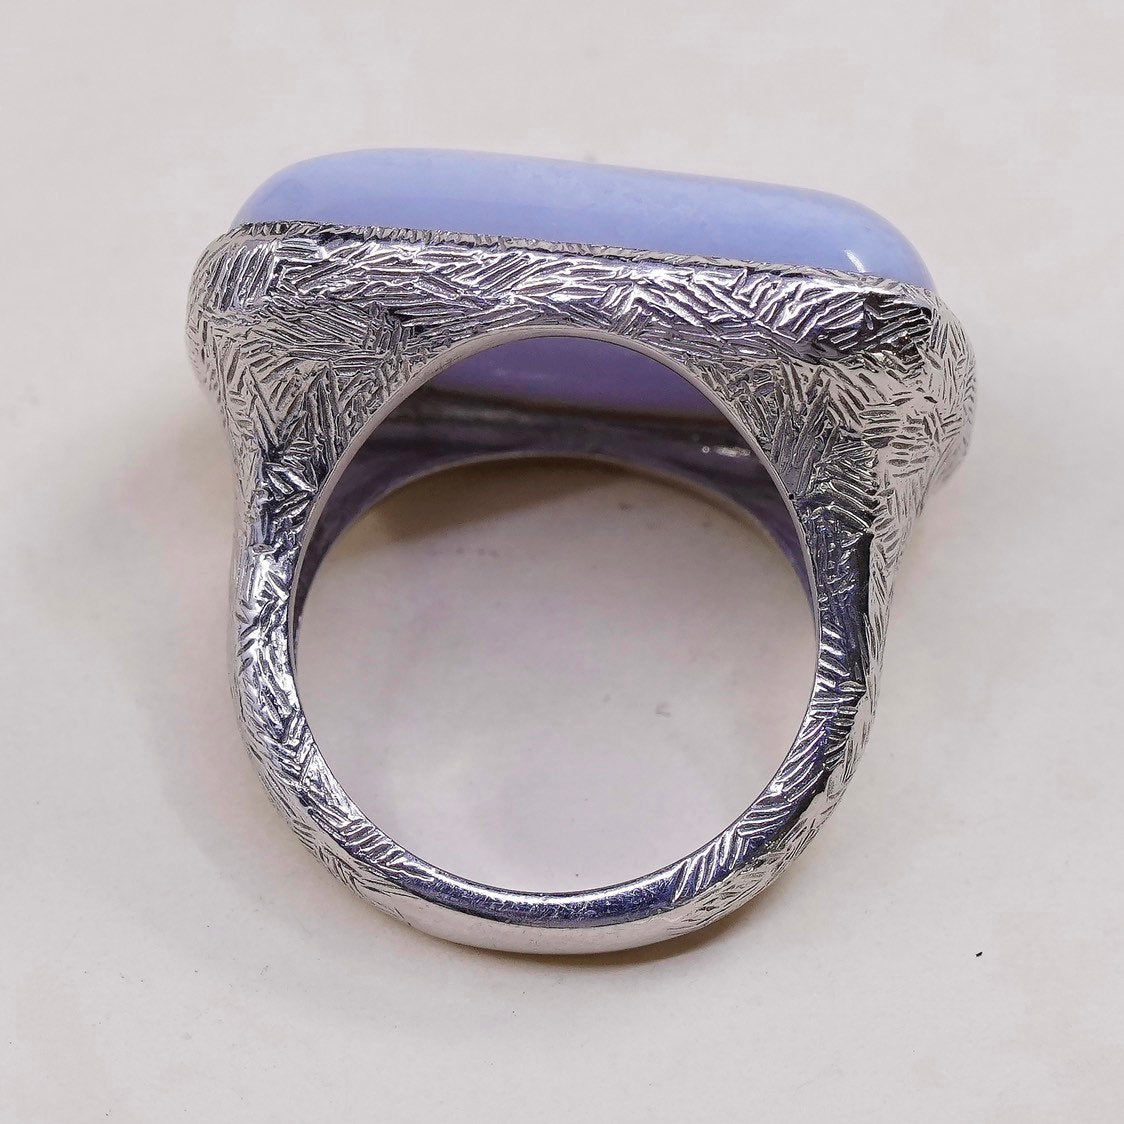 Size 7.25, VTG SB sterling silver handmade ring, 925 purple lace agate ring